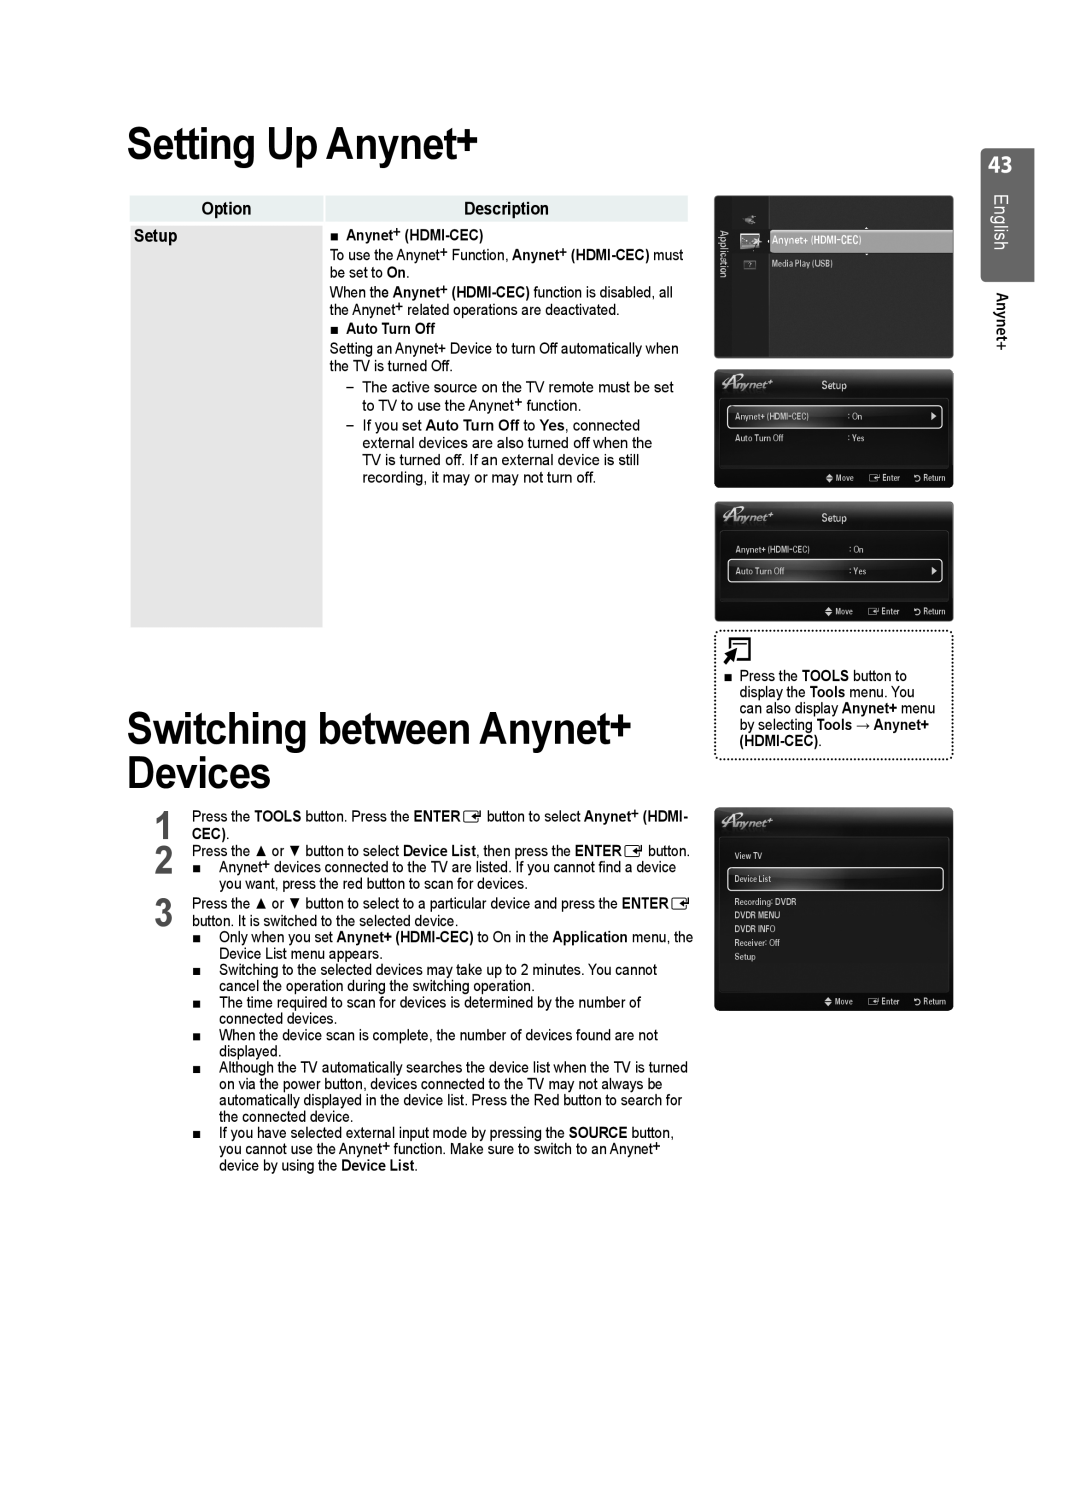 Samsung LE40B553 Setting Up Anynet+, Switching between Anynet+ Devices, English Anynet+, Anynet + HDMI-CEC, Auto Turn Off 